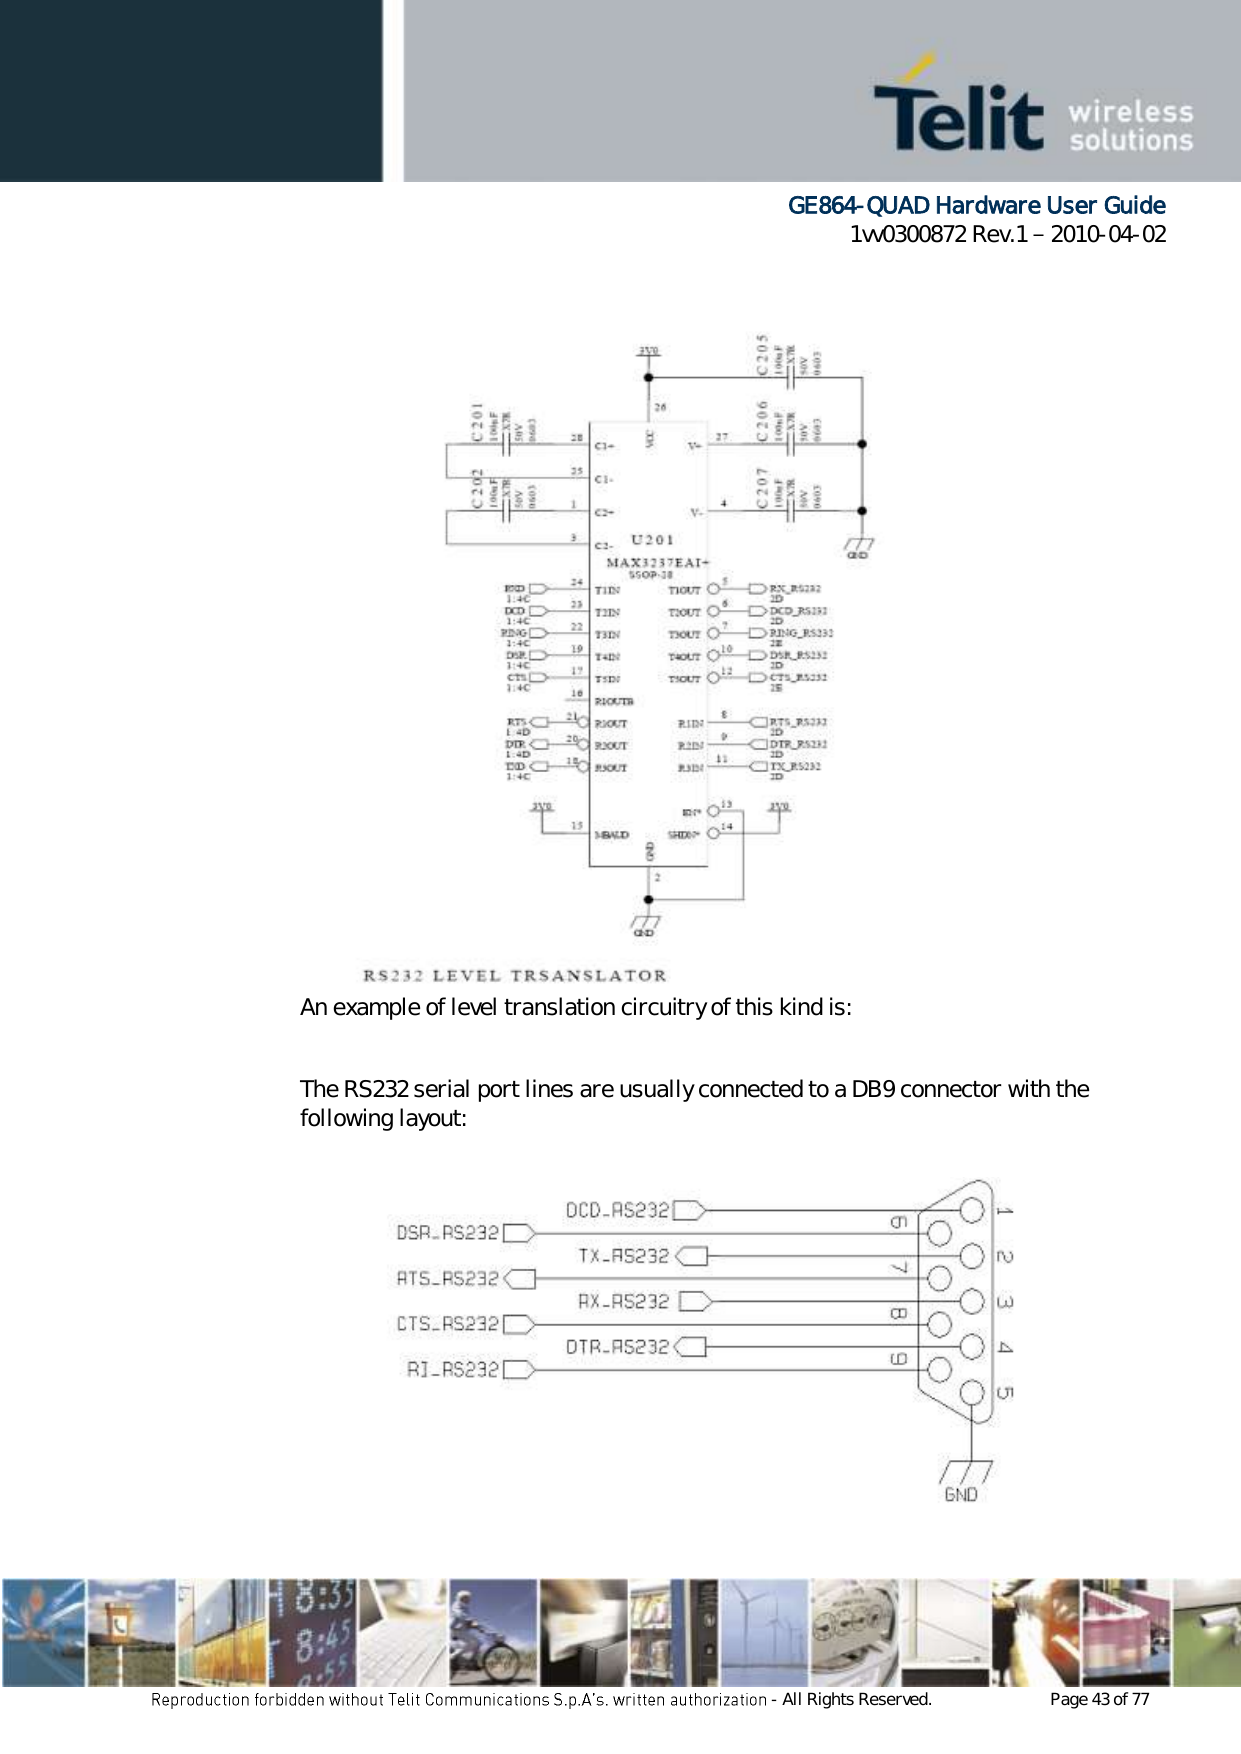      GE864-QUAD Hardware User Guide 1vv0300872 Rev.1   2010-04-02 - All Rights Reserved.    Page 43 of 77  An example of level translation circuitry of this kind is:  The RS232 serial port lines are usually connected to a DB9 connector with the following layout: 